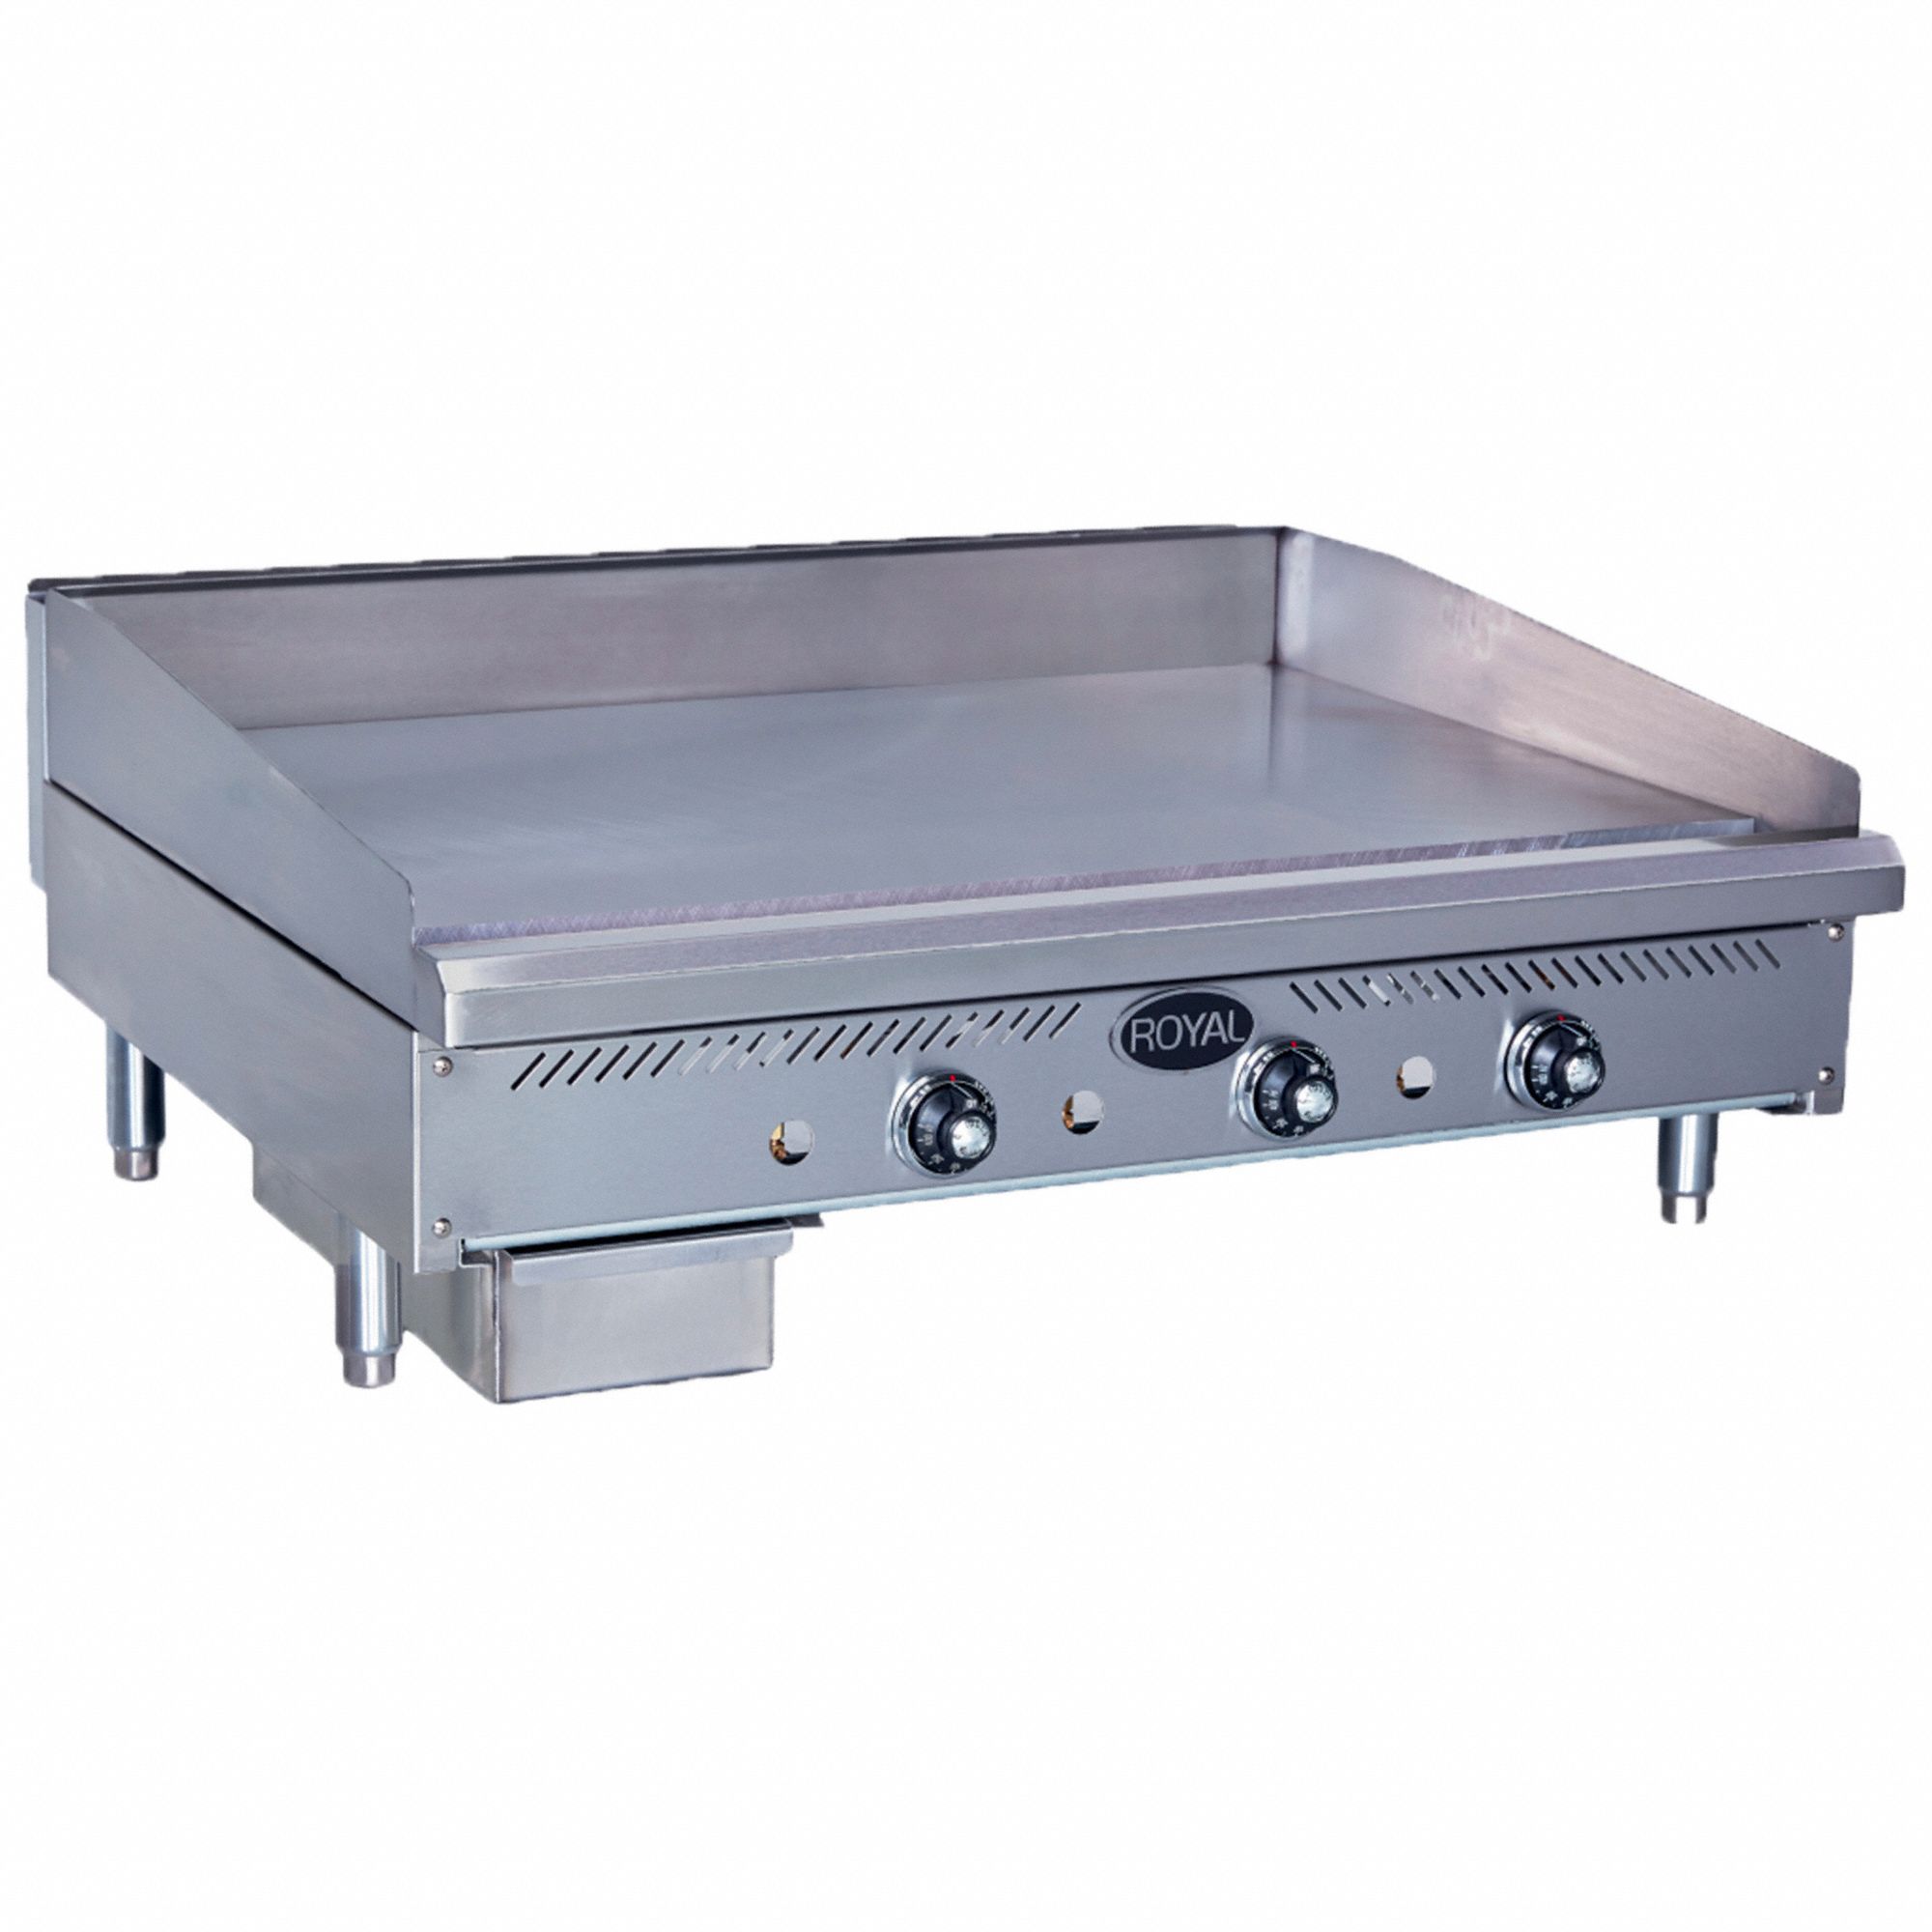 Natural Gas Griddle: Gas, Thermostatic, 35 7/8 in x 24 in Cooking Surface